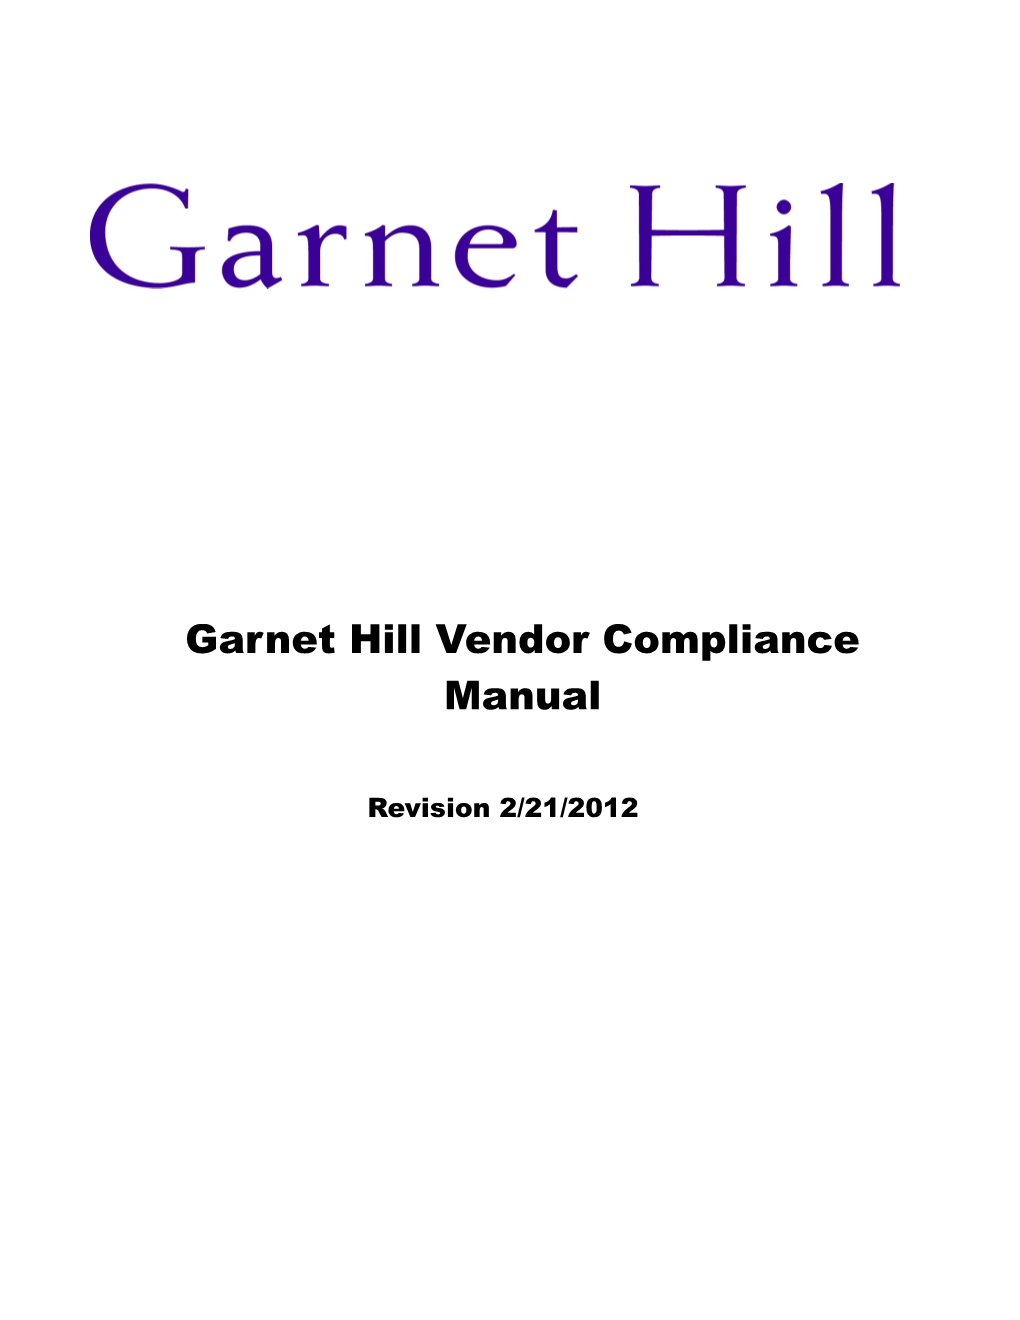 Acknowledgment of Vendor Compliance Manual Revision 4 s1